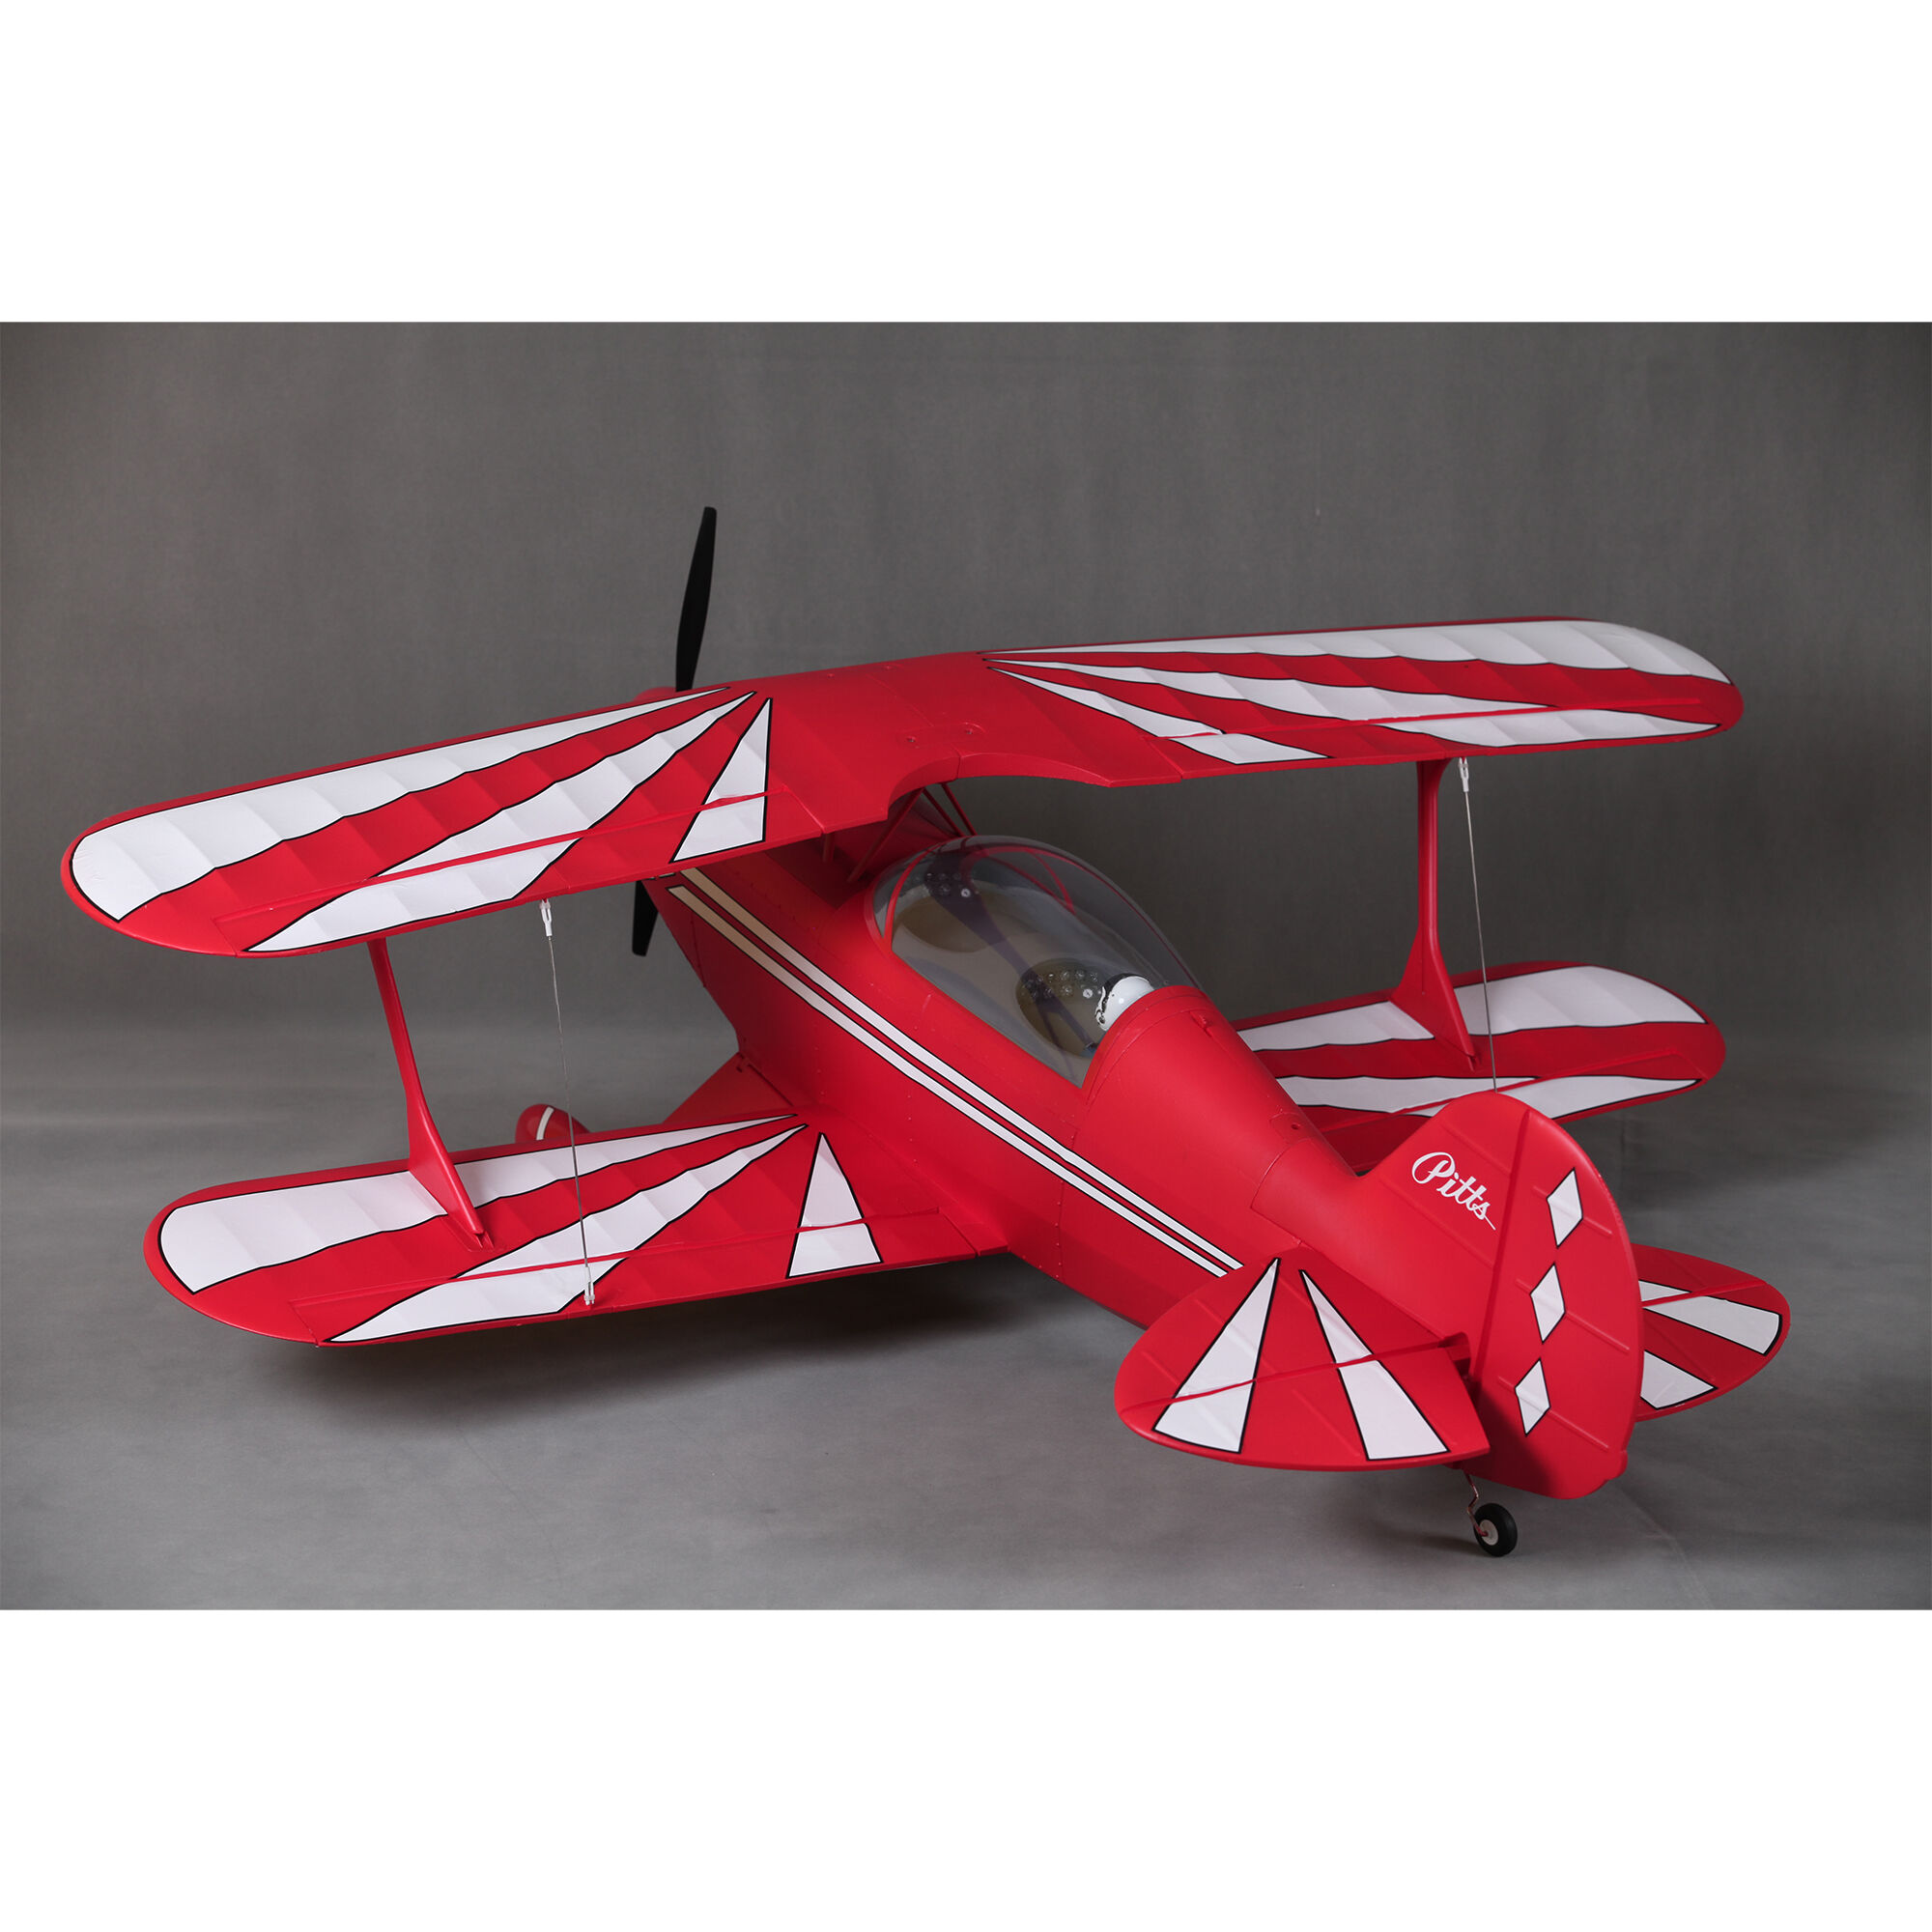 Pitts 1400mm PNP V2 with Reflex